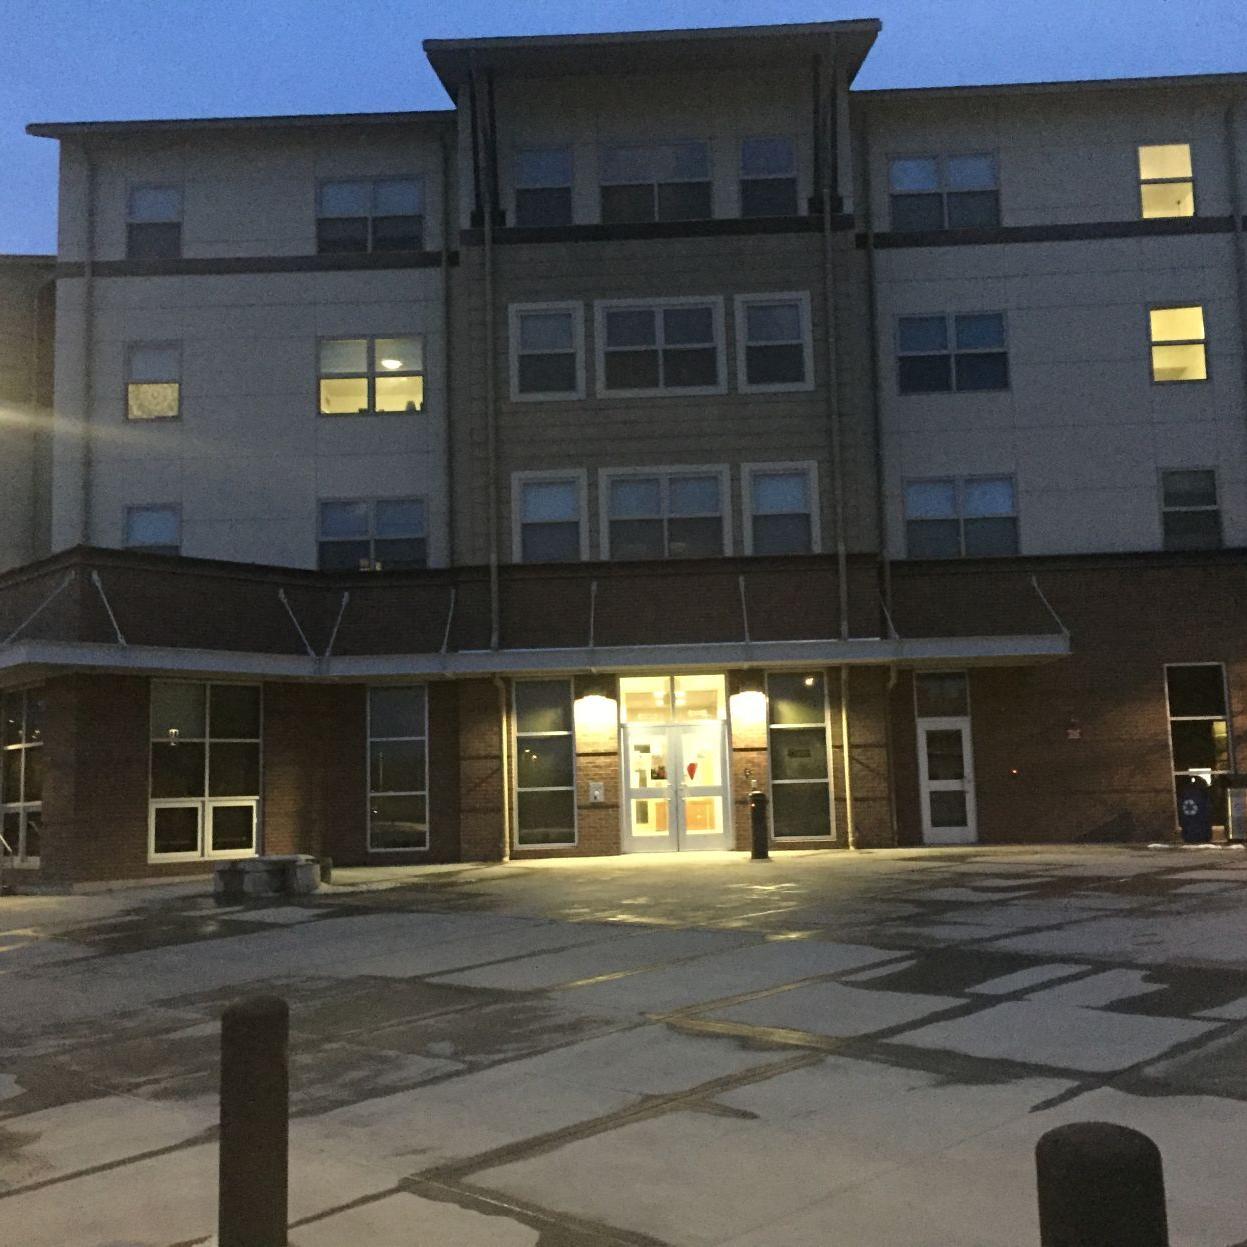 Cwu Calendar Fall 2022 Cwu Plans To Open Residence Halls In Full For Fall | Local News |  Dailyrecordnews.com